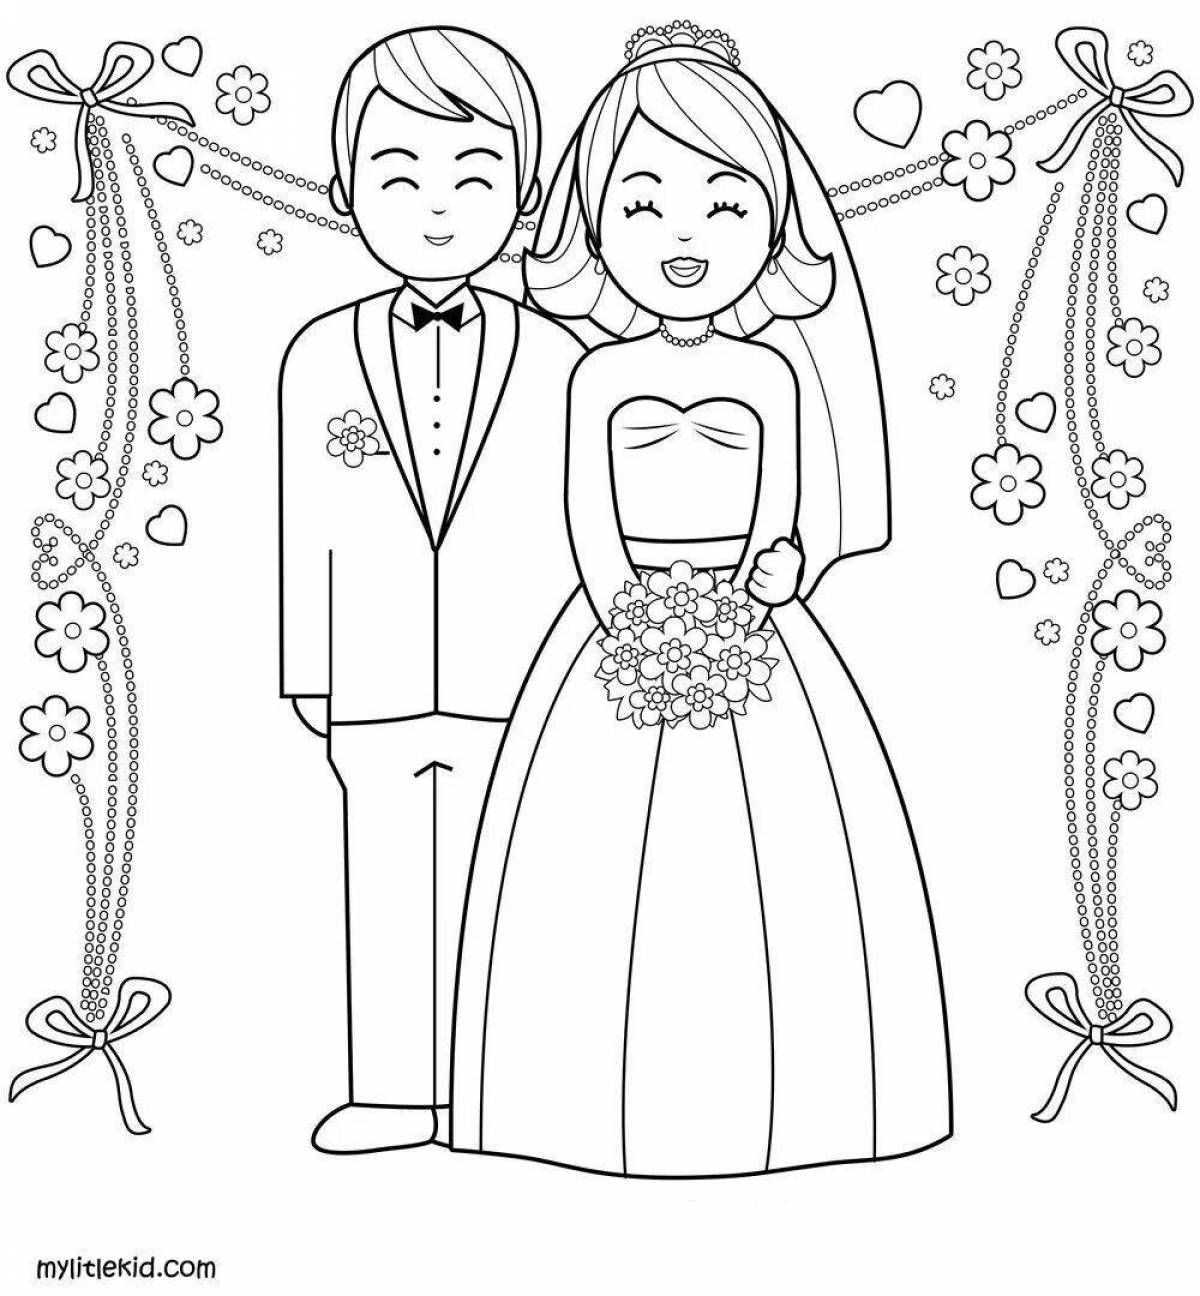 Dazzling wedding coloring book for kids